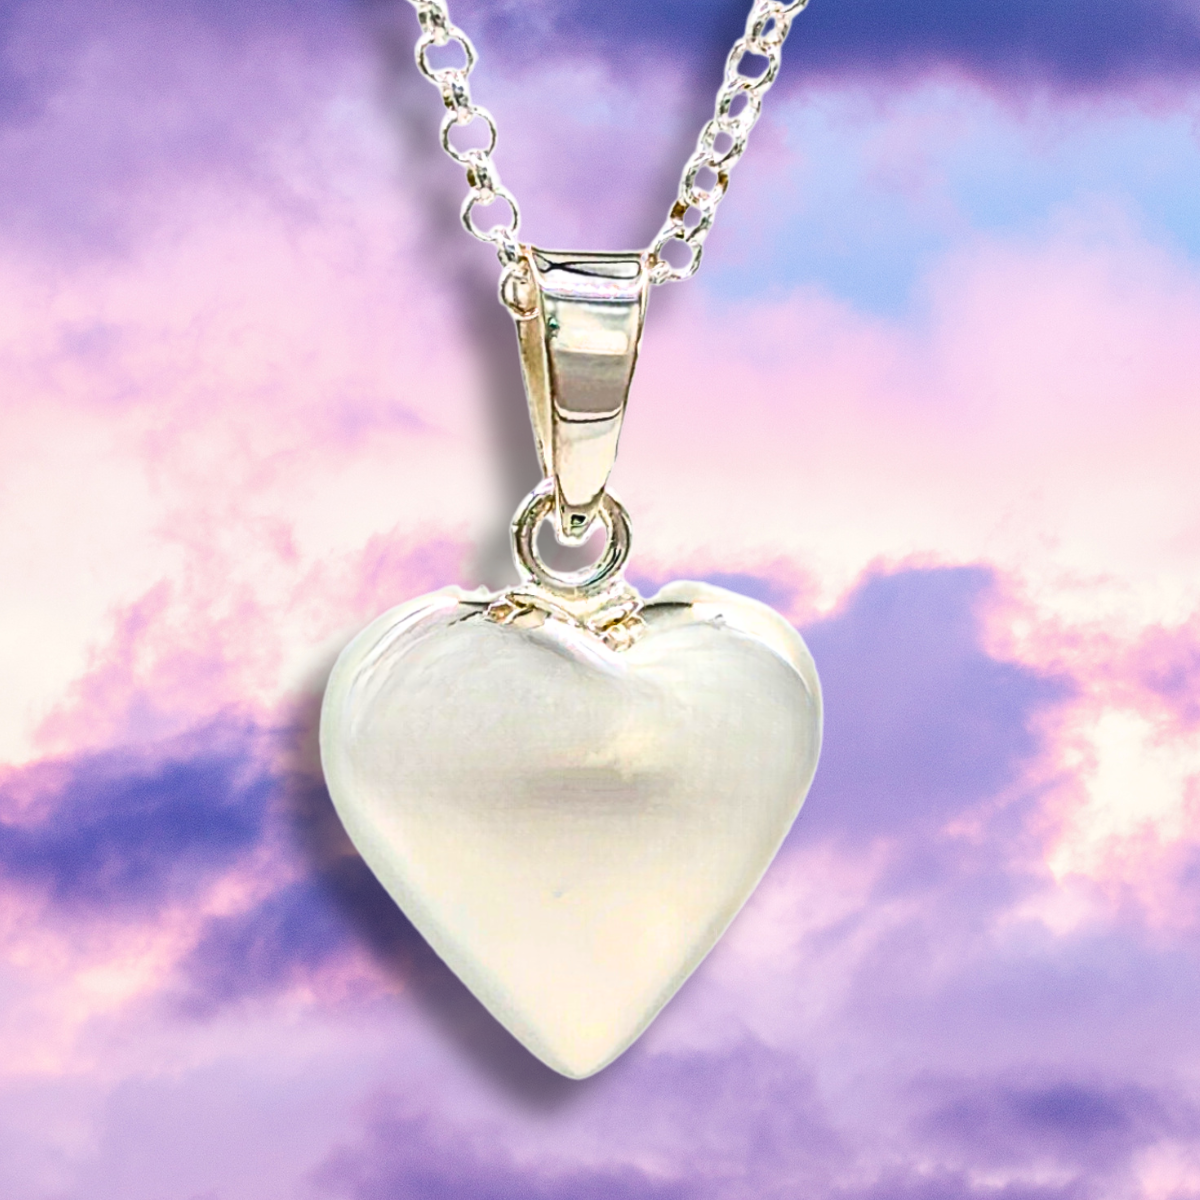 Buy shajwo Cremation Jewelry Angel Wing Heart Urn Necklaces for Ashes  Memorial Keepsake Pendant for Women Men, Metal, stainless steel at Amazon.in